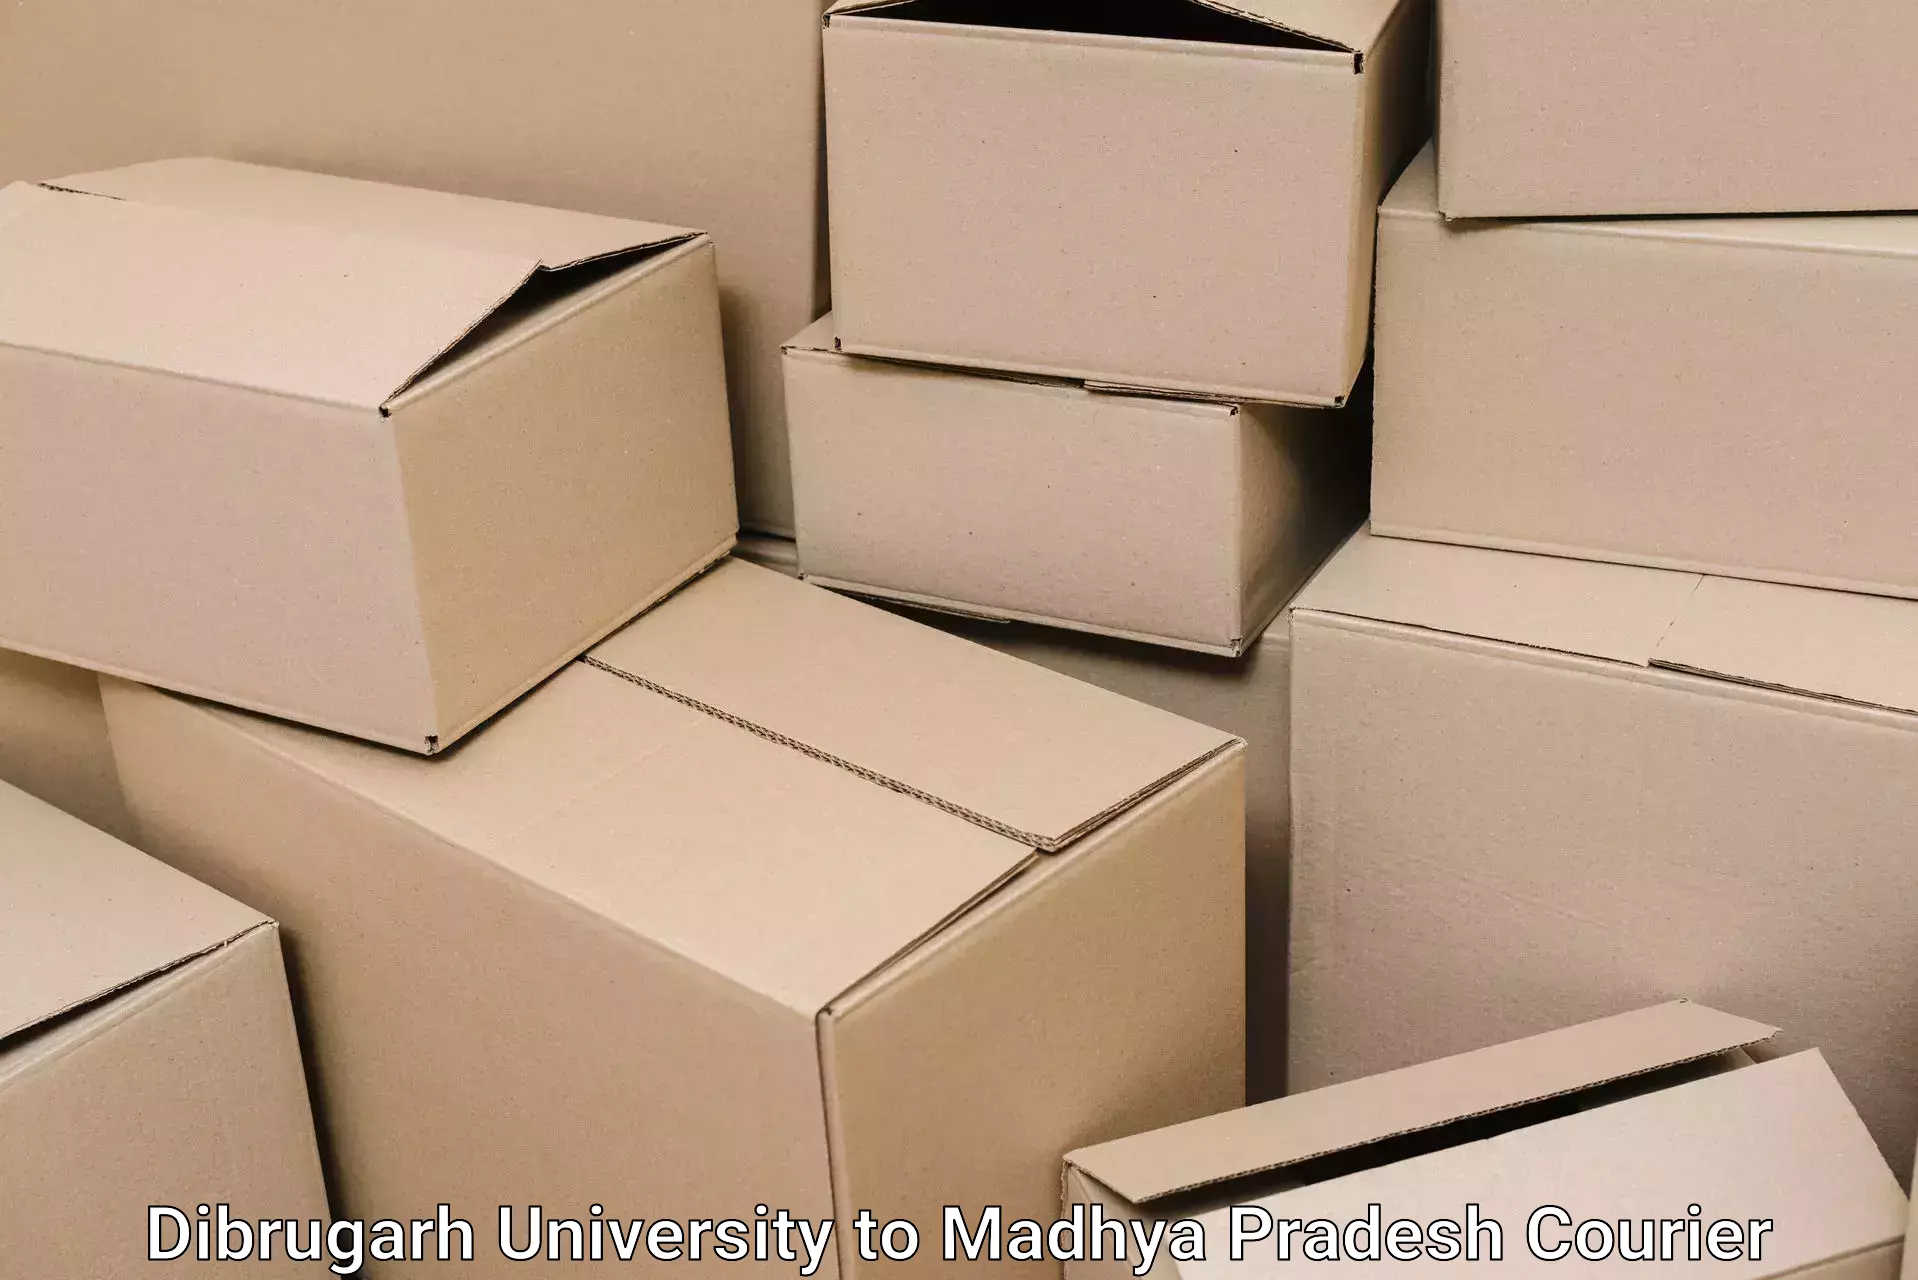 Safe moving services in Dibrugarh University to Udaipura